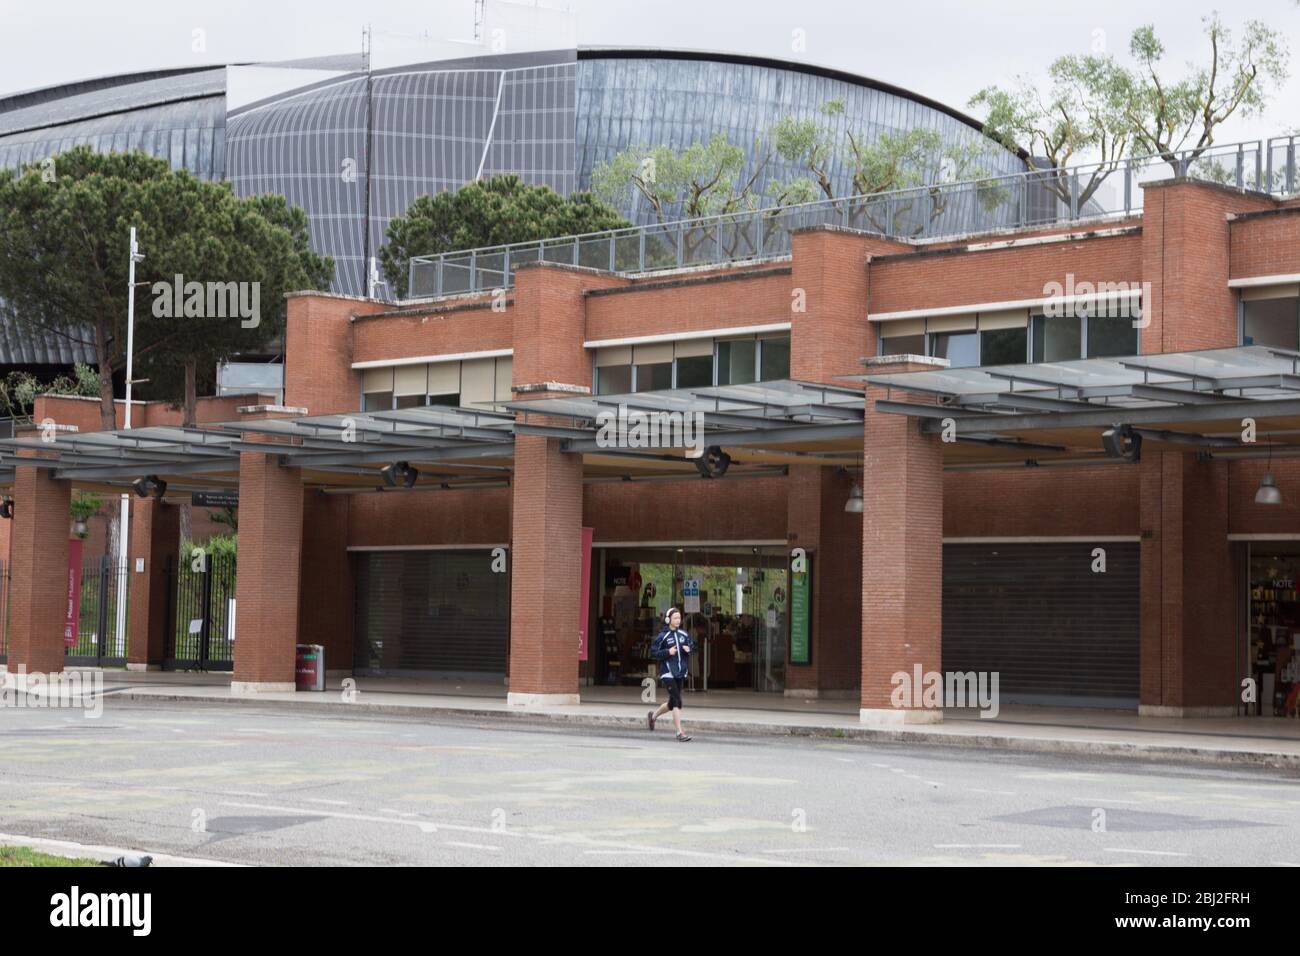 Roma, Italy. 28th Apr, 2020. View of Auditorium Parco della Musica in Rome closed due to the lockdown for the Covid-19 pandemic. (Photo by Matteo Nardone/Pacific Press) Credit: Pacific Press Agency/Alamy Live News Stock Photo